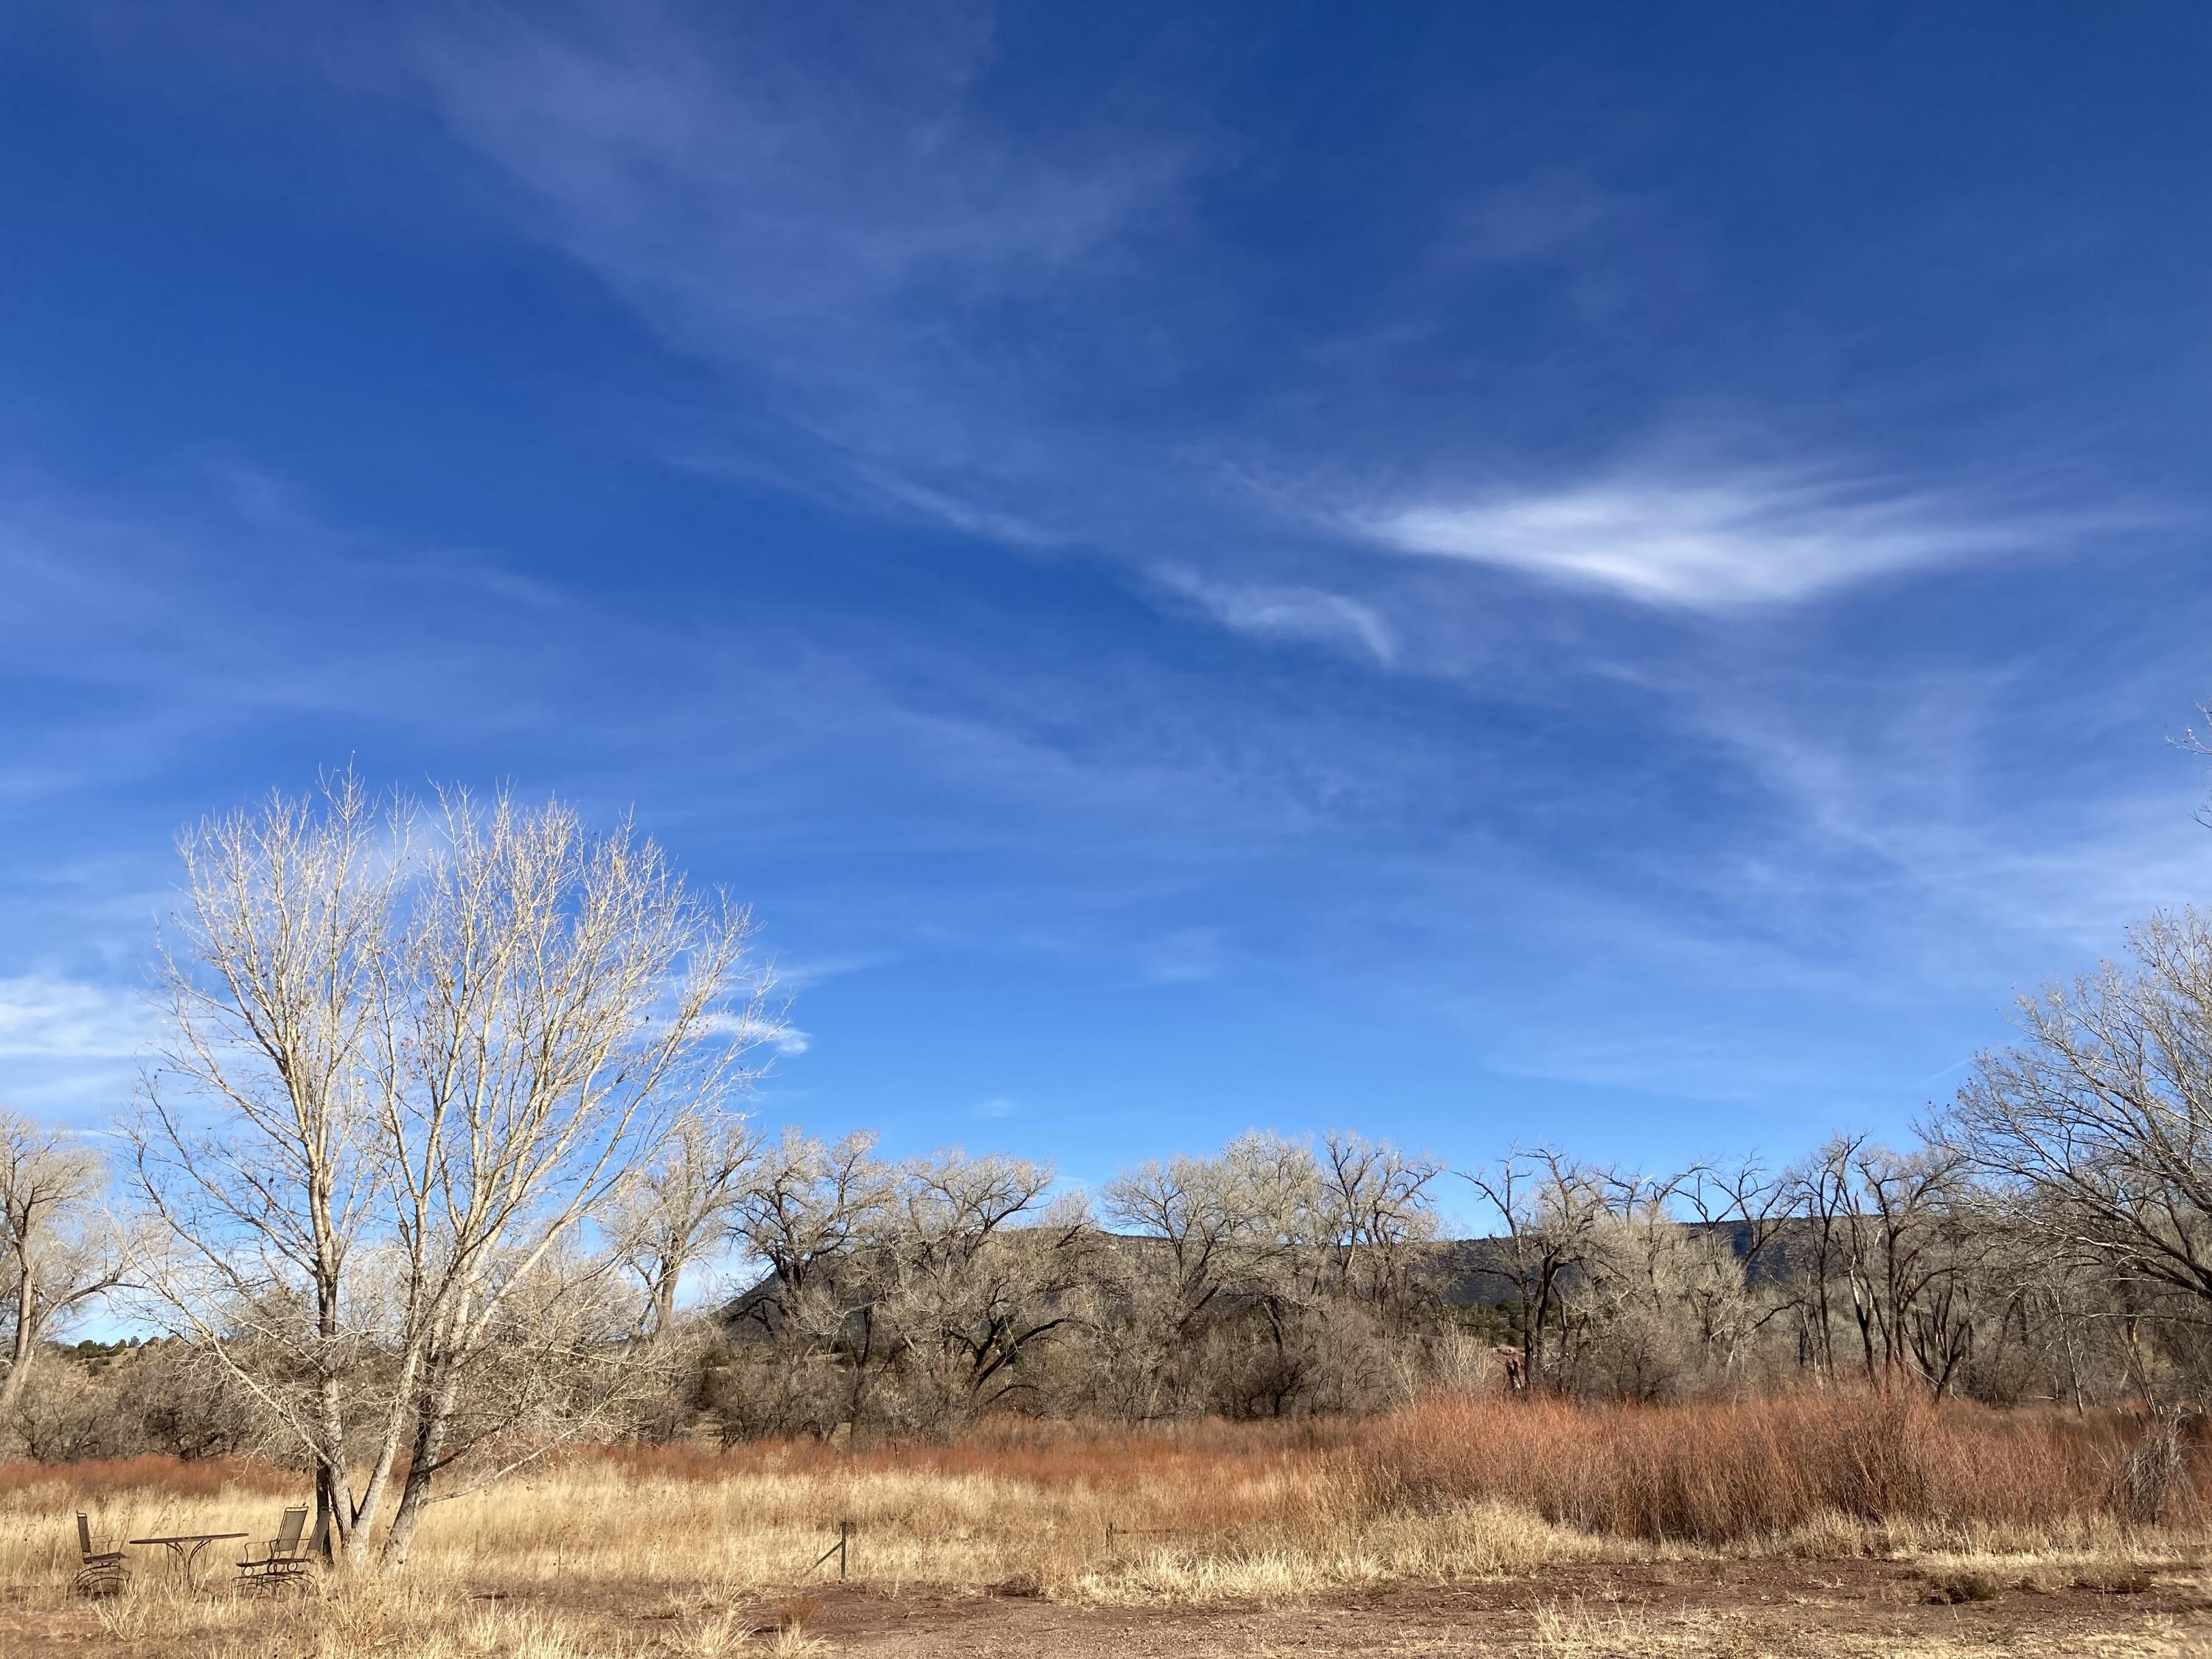 317 Highway 3, Ribera, New Mexico 87560, ,Farm,For Sale,317 Highway 3,1054922